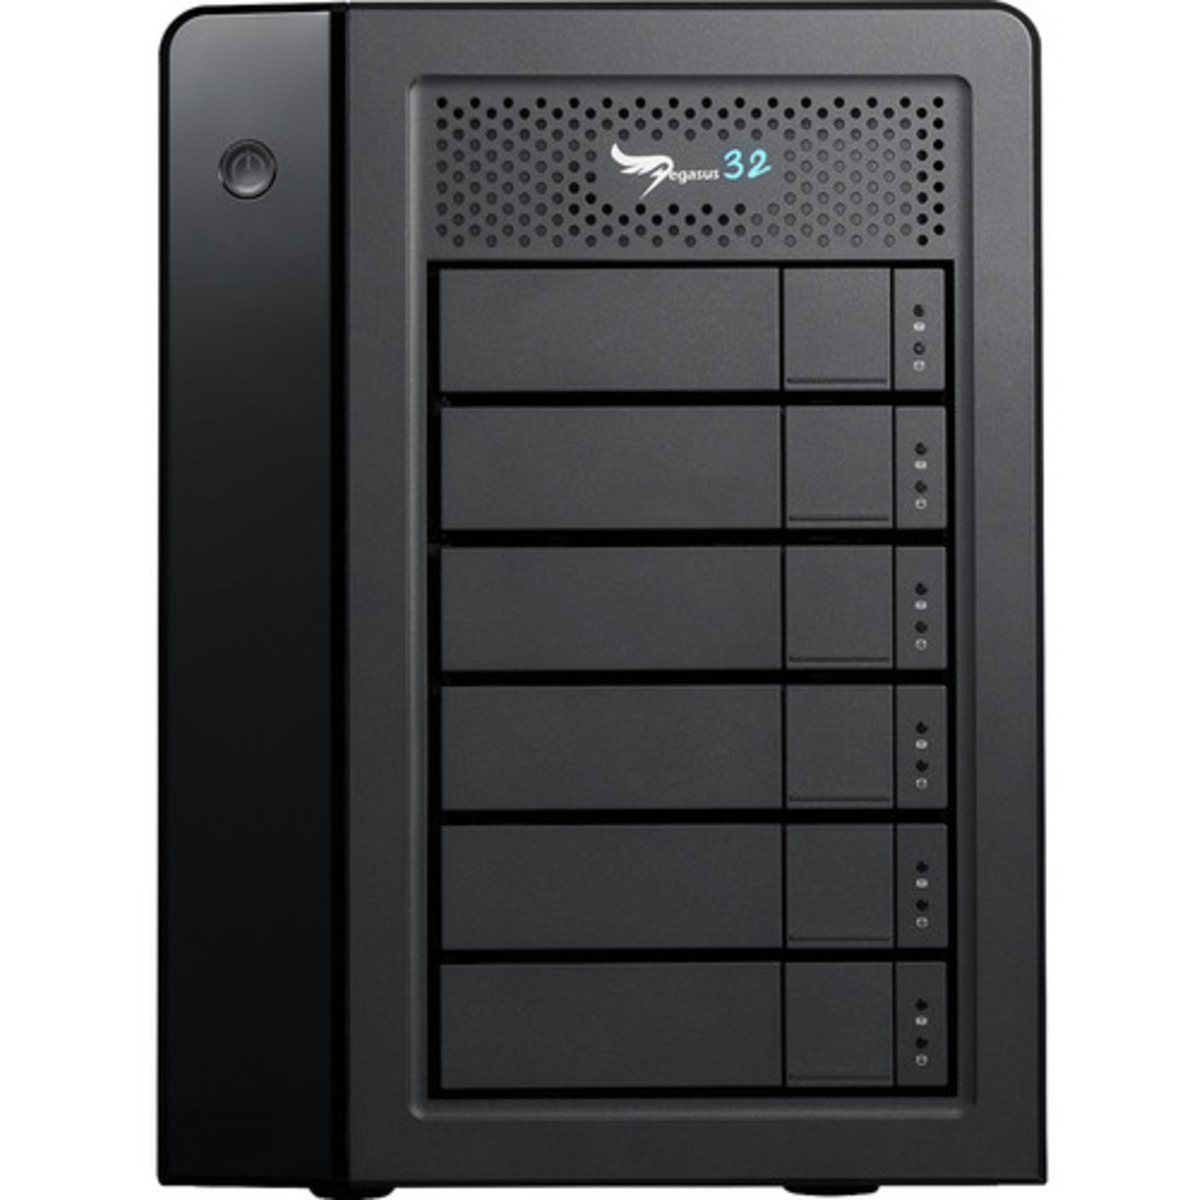 buy $4101 Promise Technology Pegasus32 R6 Thunderbolt 3 60tb Desktop DAS - Direct Attached Storage Device 6x10000gb Seagate EXOS X16 ST10000NM001G 3.5 7200rpm SATA 6Gb/s HDD ENTERPRISE Class Drives Installed - Burn-In Tested - nas headquarters buy network attached storage server device das new raid-5 free shipping usa christmas new year holiday sale Pegasus32 R6 Thunderbolt 3